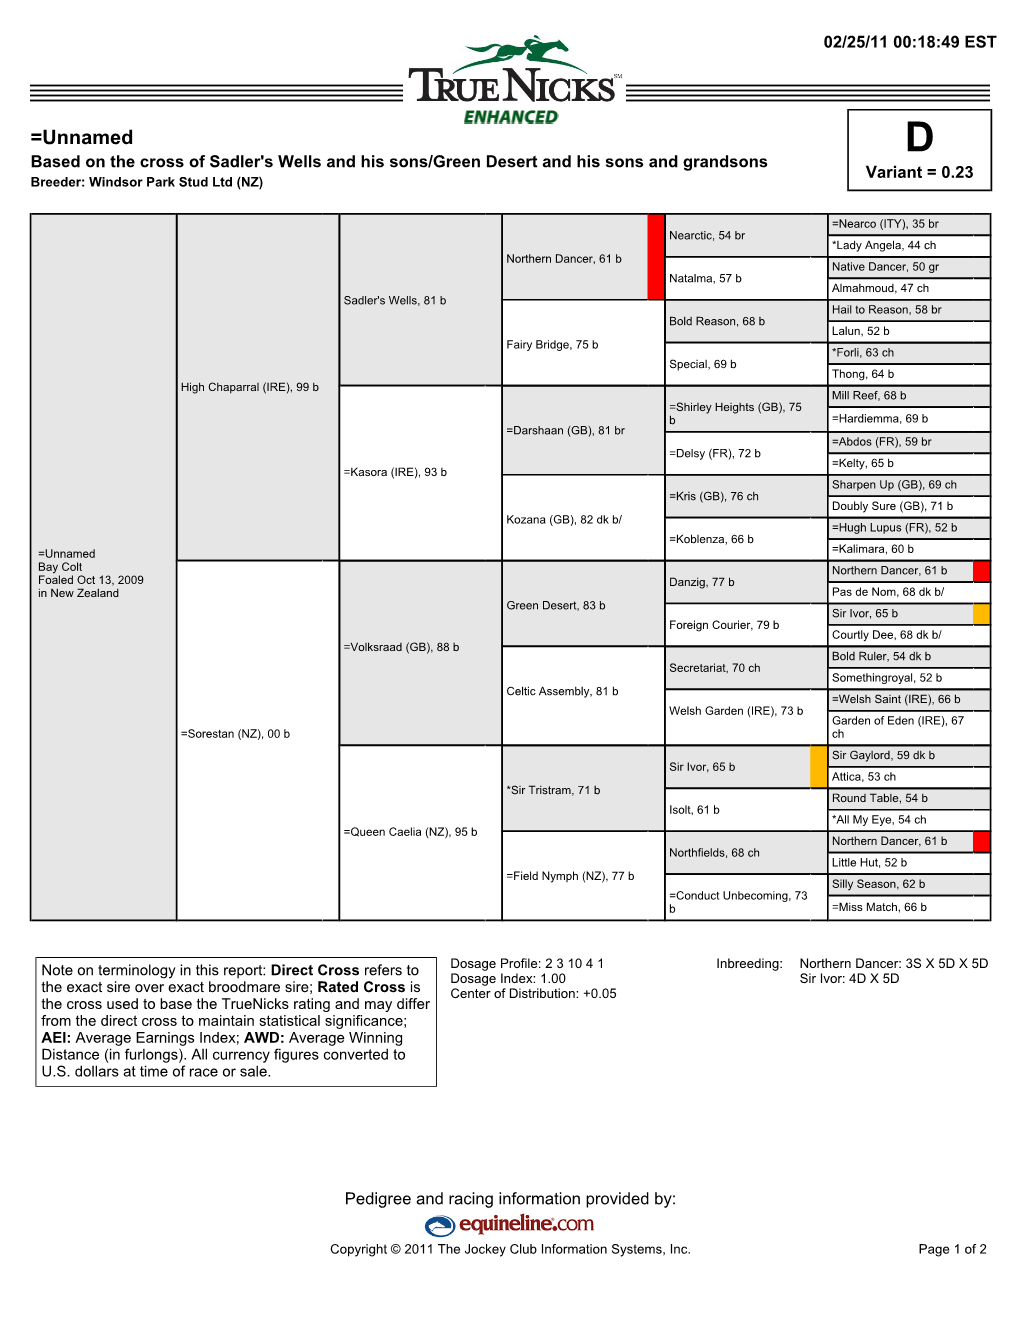 =Unnamed D Based on the Cross of Sadler's Wells and His Sons/Green Desert and His Sons and Grandsons Variant = 0.23 Breeder: Windsor Park Stud Ltd (NZ)